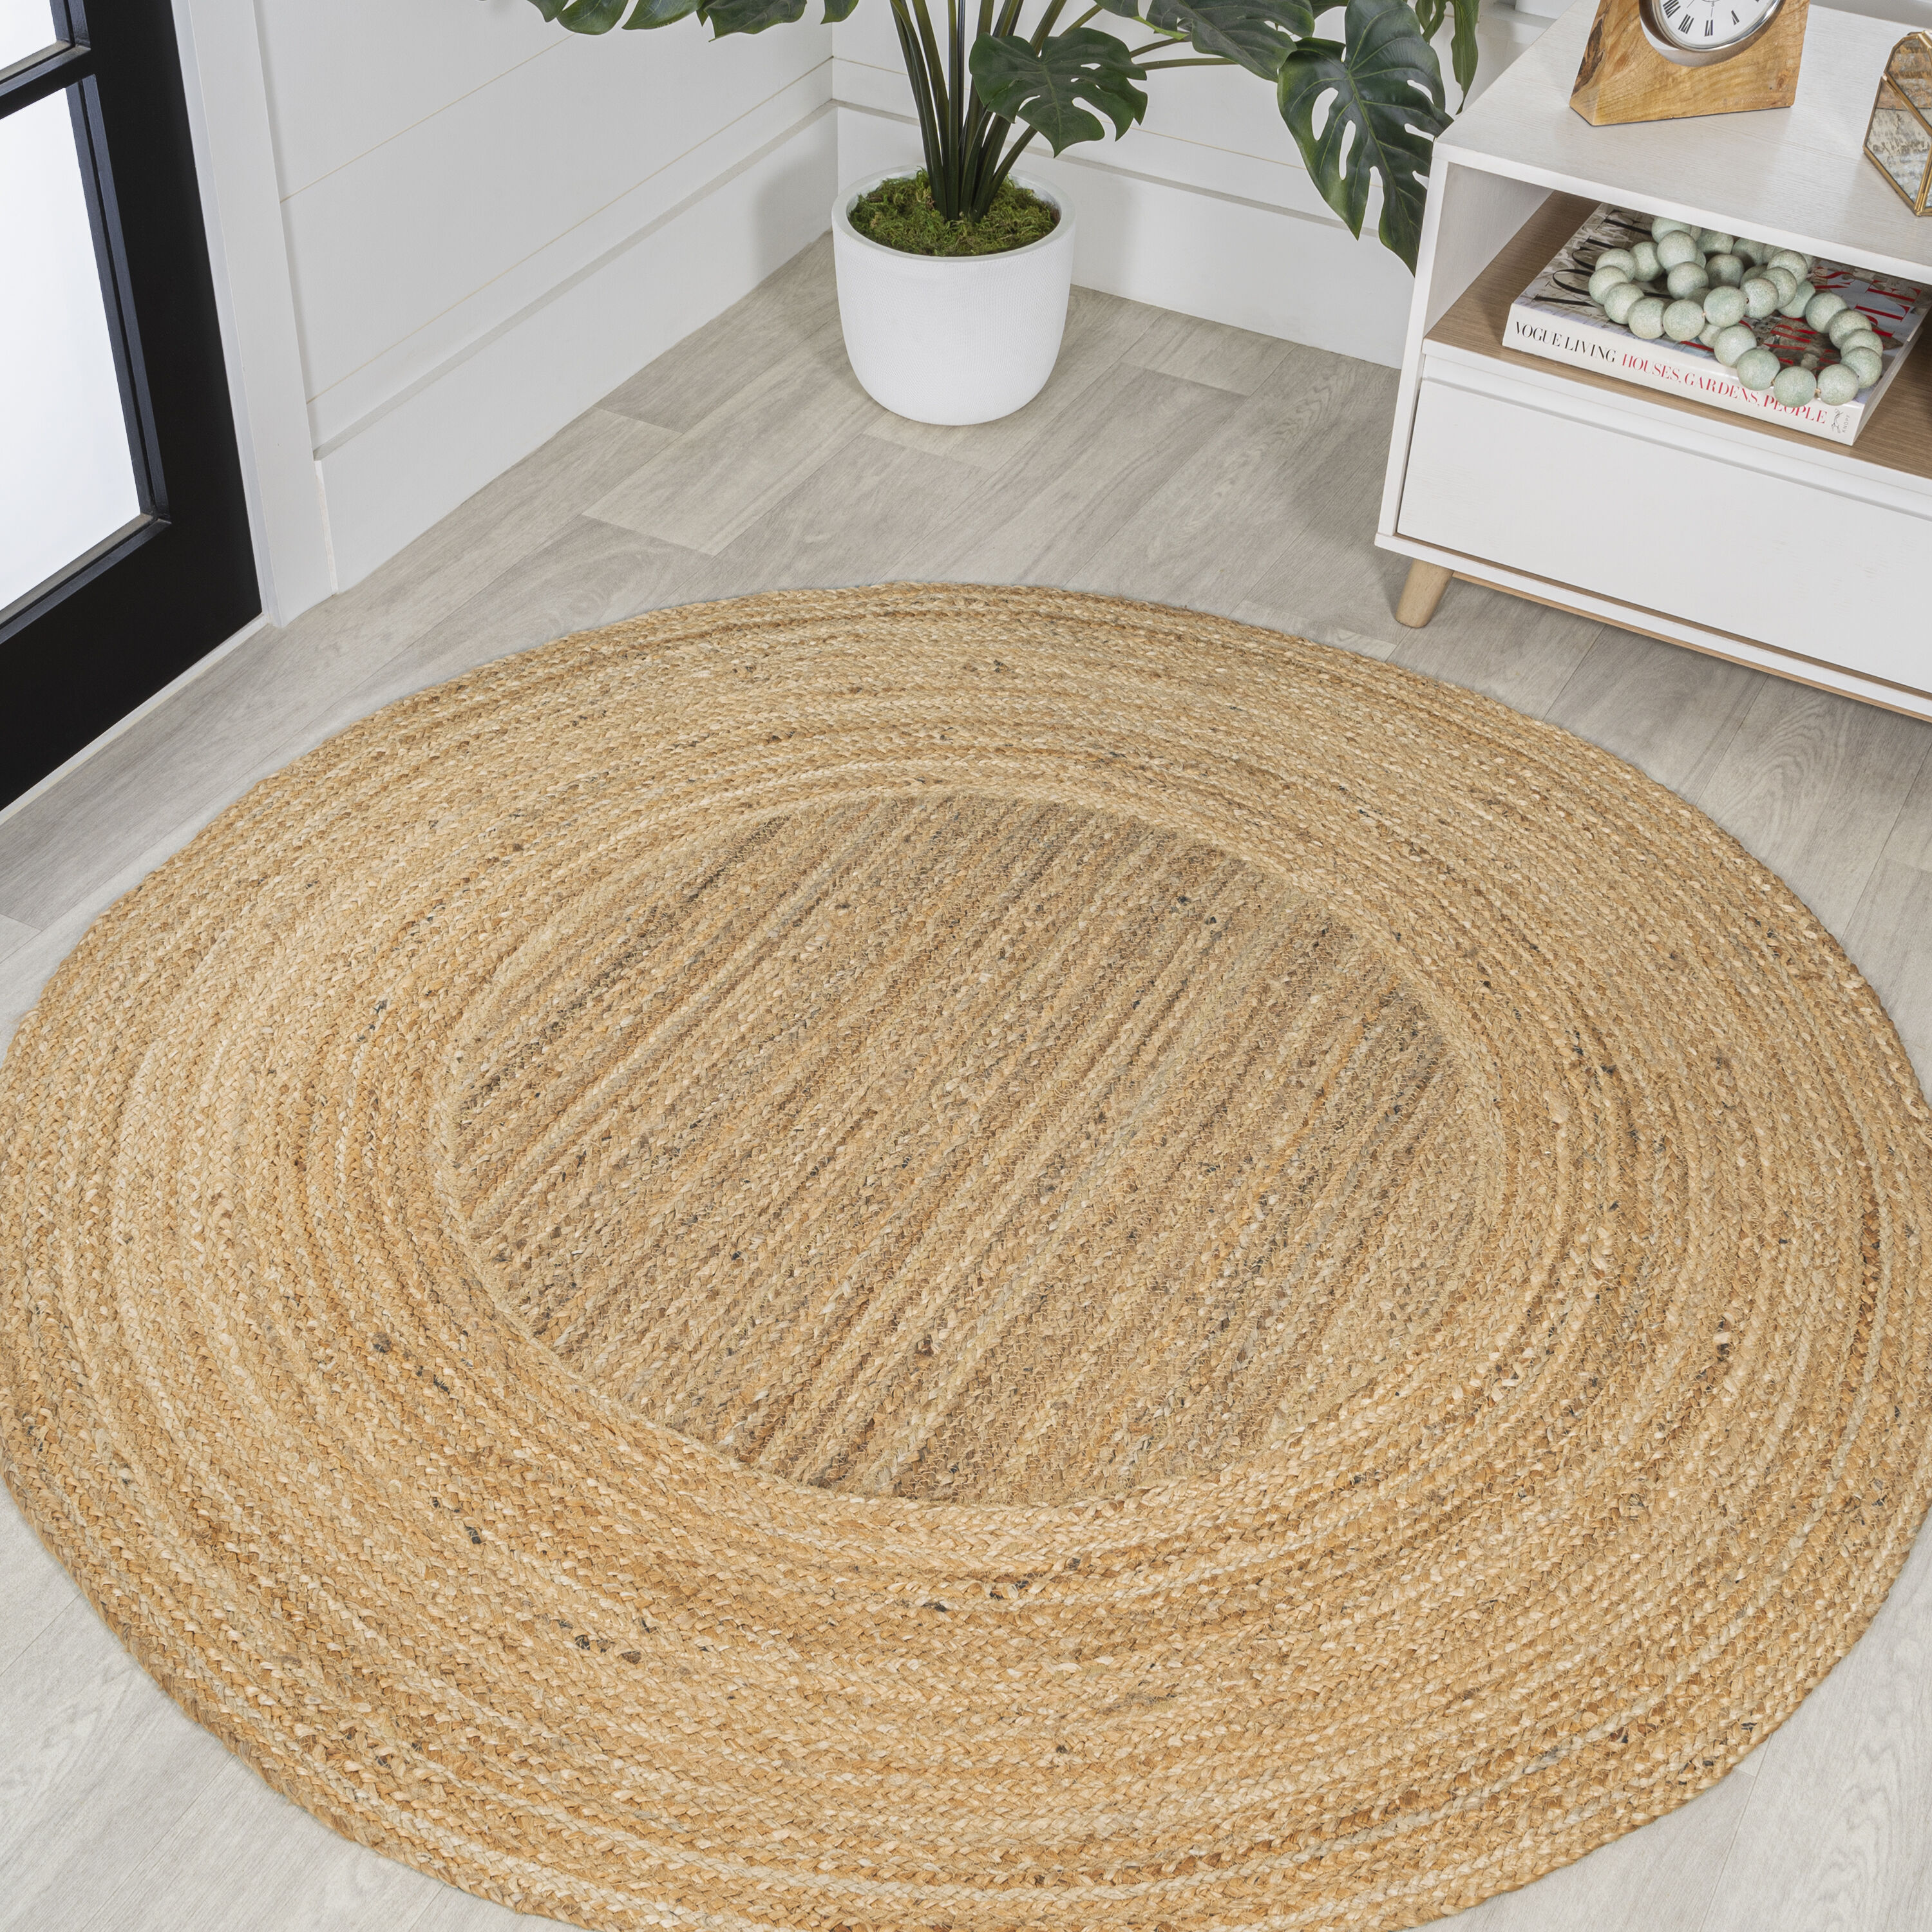  Round Jute Area Rug Rustic Vintage Hand Braided Natural Fibre  Boho Soft Chunky Runner for Living Room Bedroom Entryway Hallways Indoor  Outdoor Framhouse Kitchen Carpets (11 x 11 Sq Feet (132